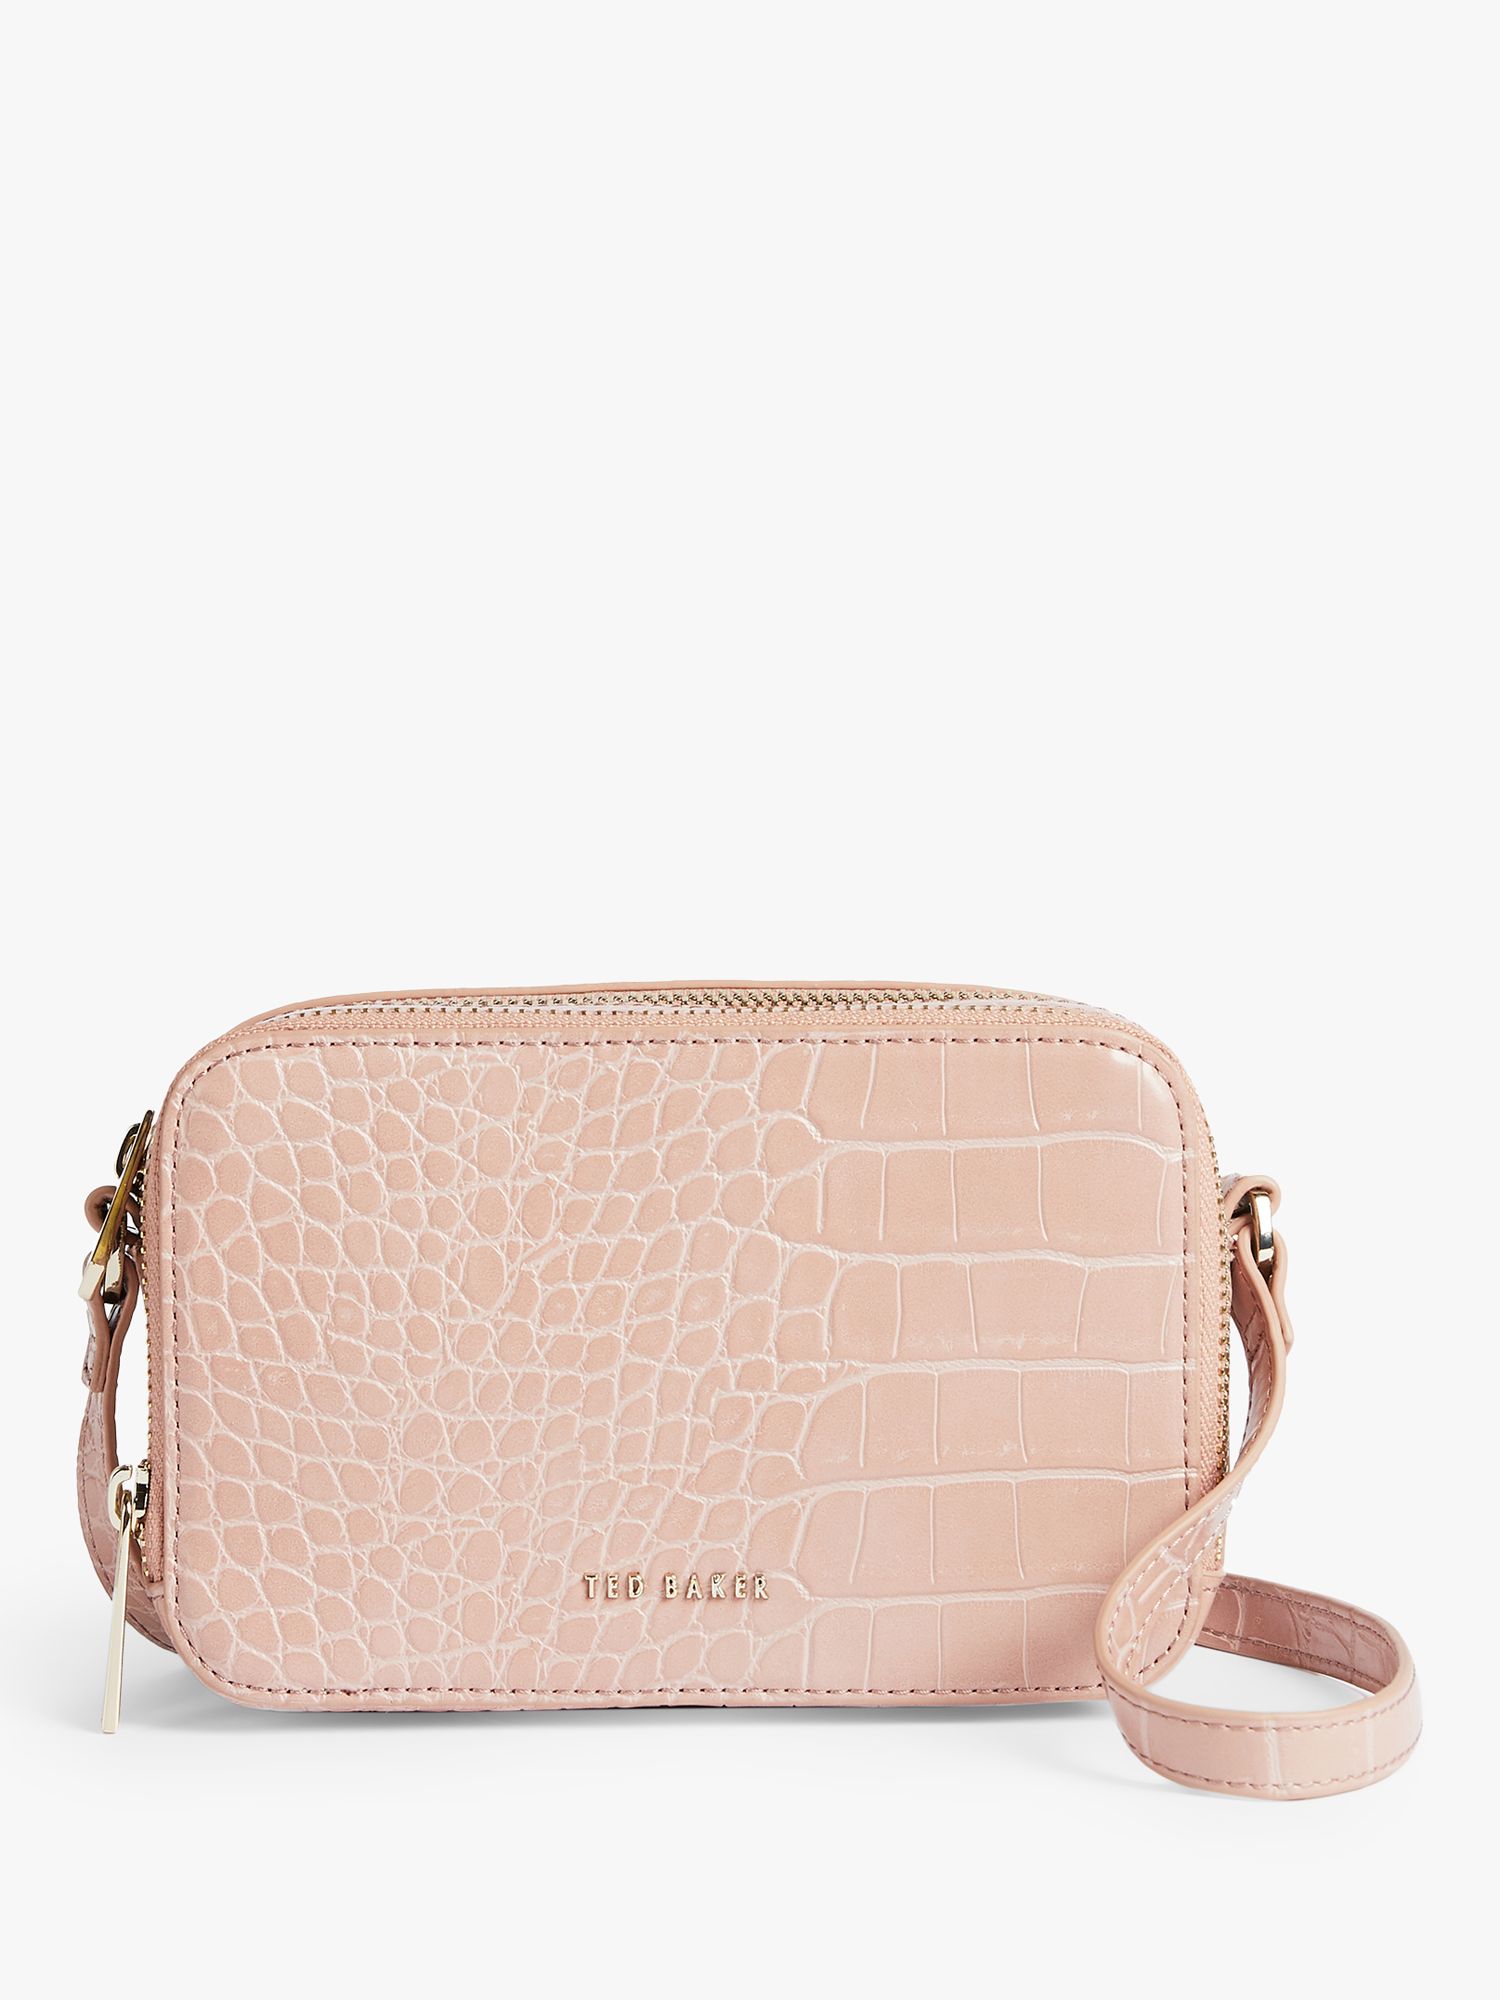 Ted Baker Stina Leather Cross Body Bag, Mid Pink at John Lewis & Partners